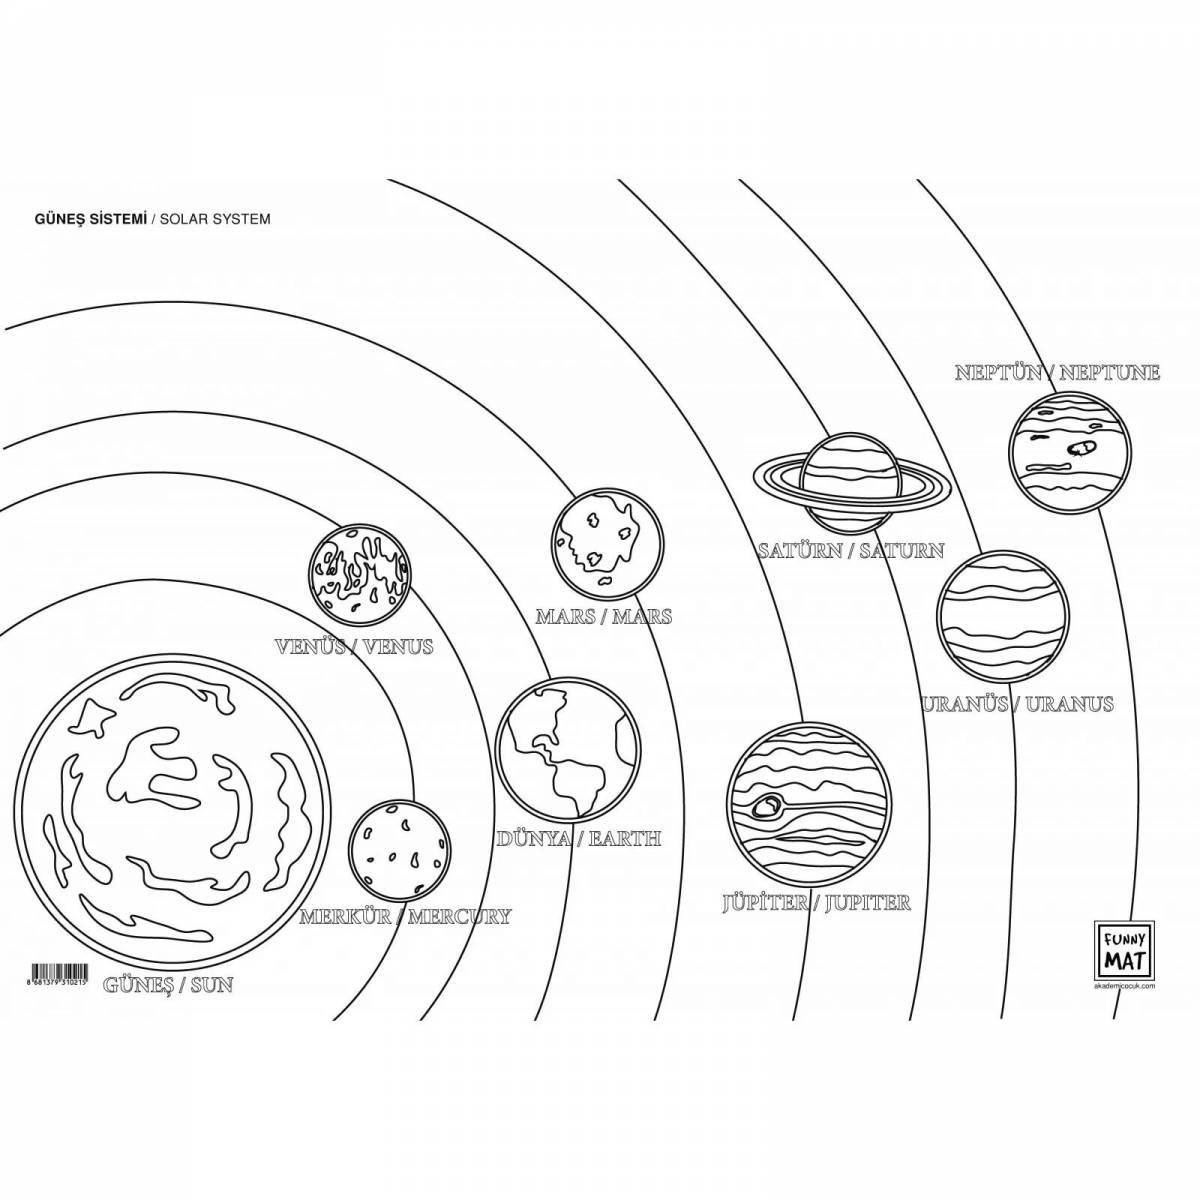 Large coloring of the planets of the solar system in order from the sun with names